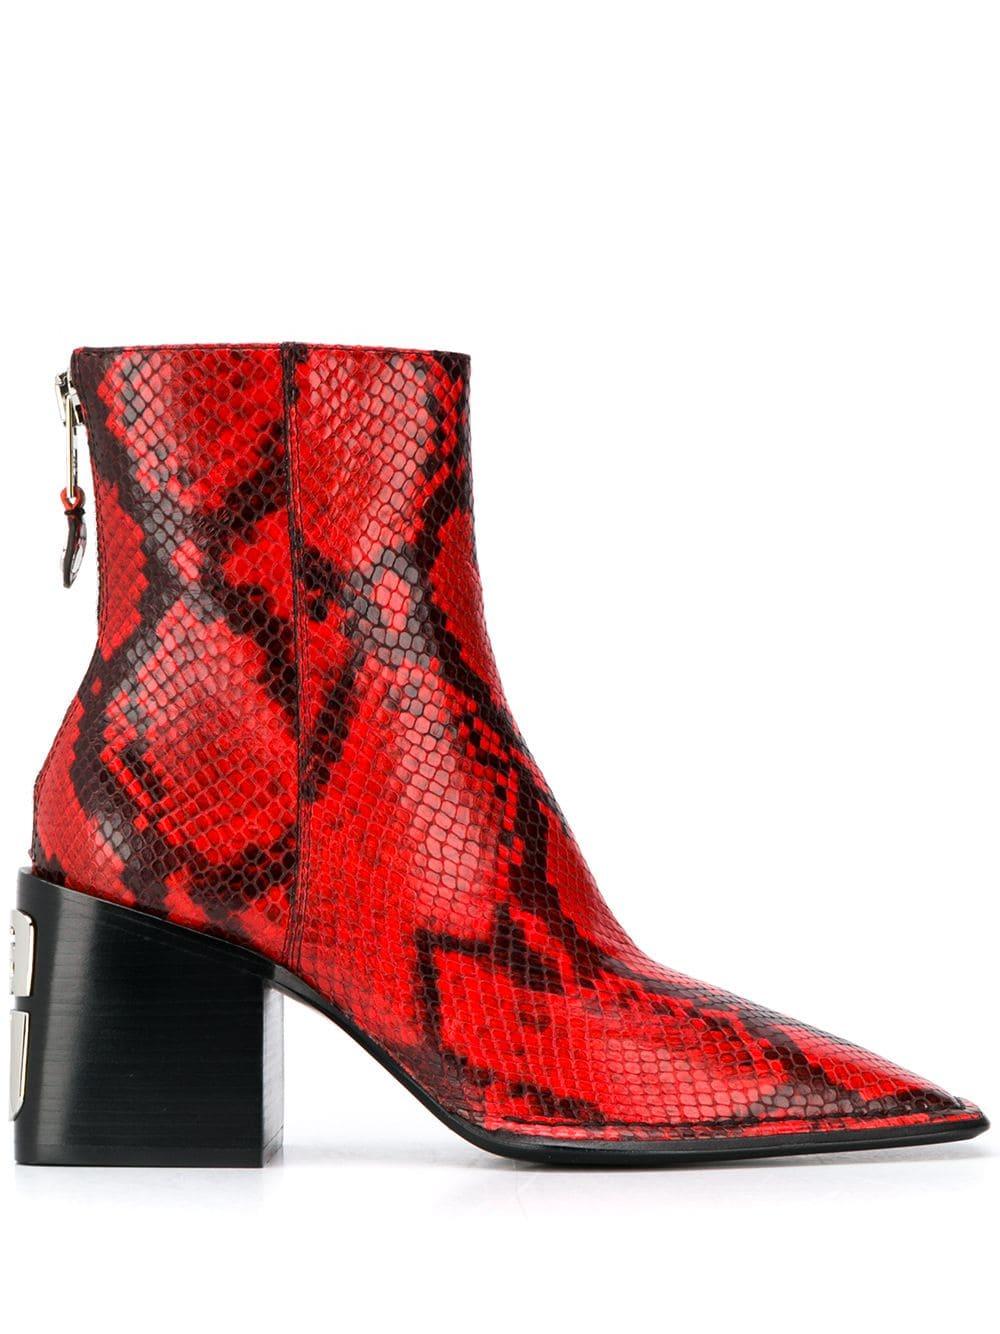 Alexander Wang Leather Snakeskin Pattern Ankle Boots in Red - Lyst